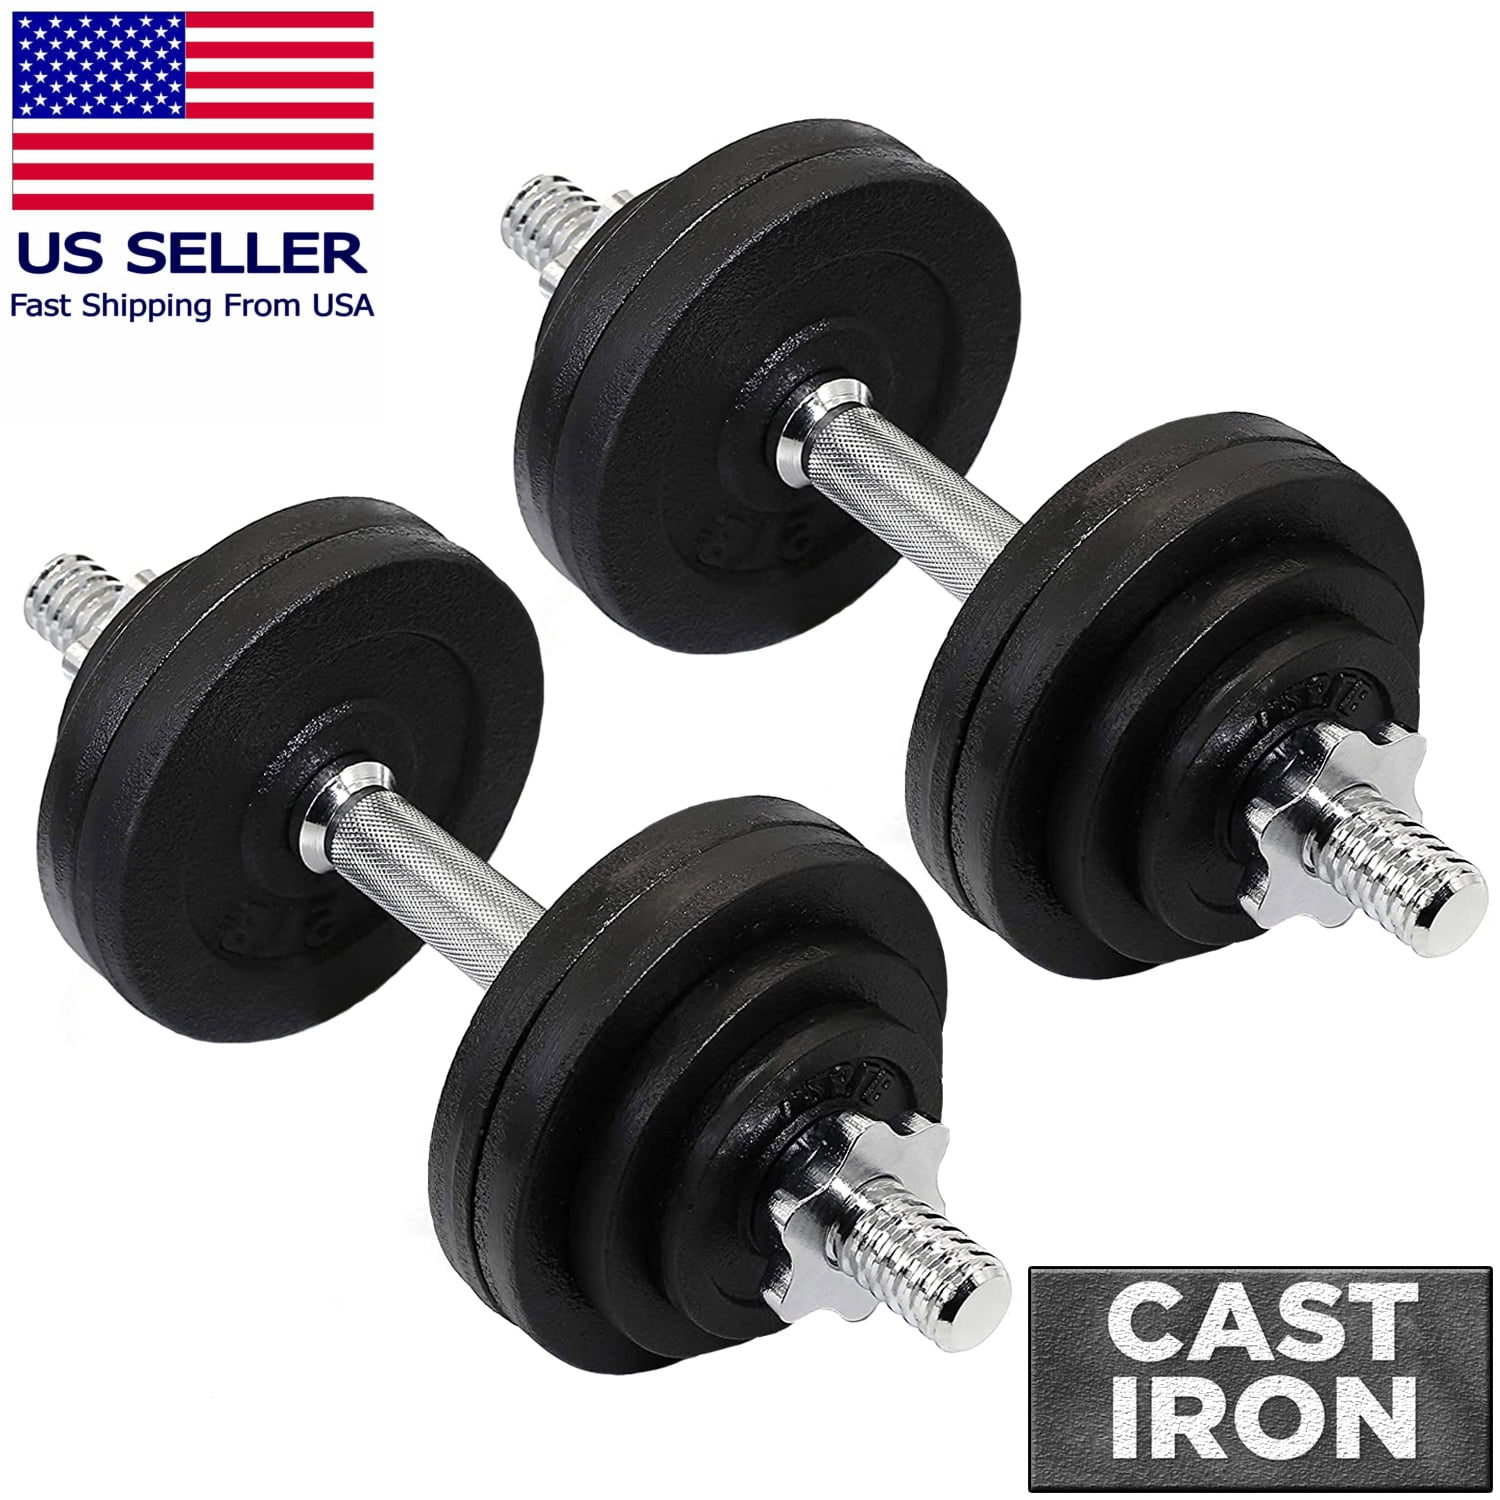 CONFIDENCE FITNESS 50KG CAST IRON BARBELL & DUMBBELL WEIGHT LIFTING SET 